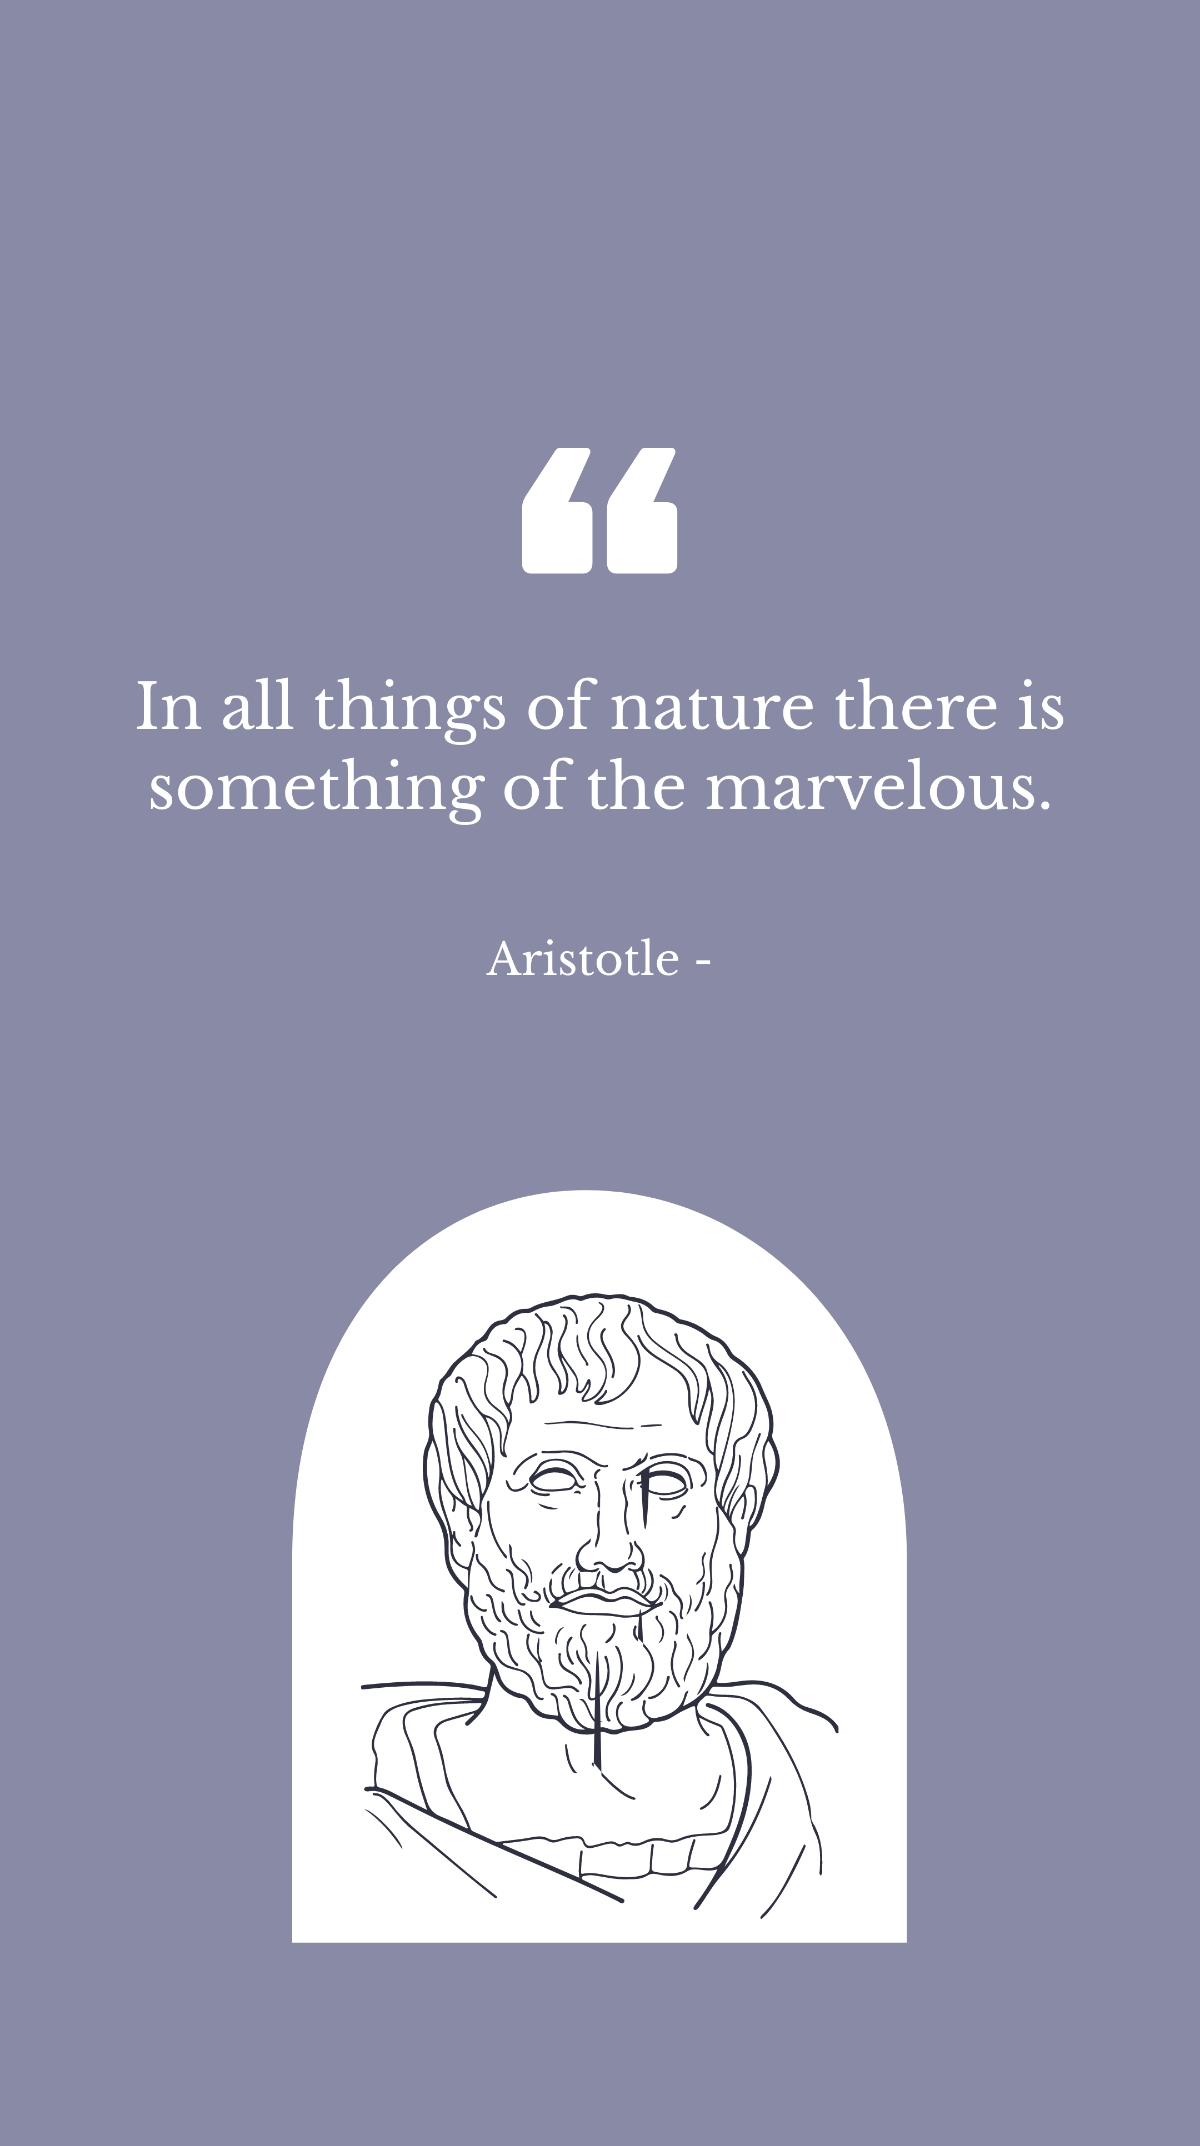 Aristotle - In all things of nature there is something of the marvelous.